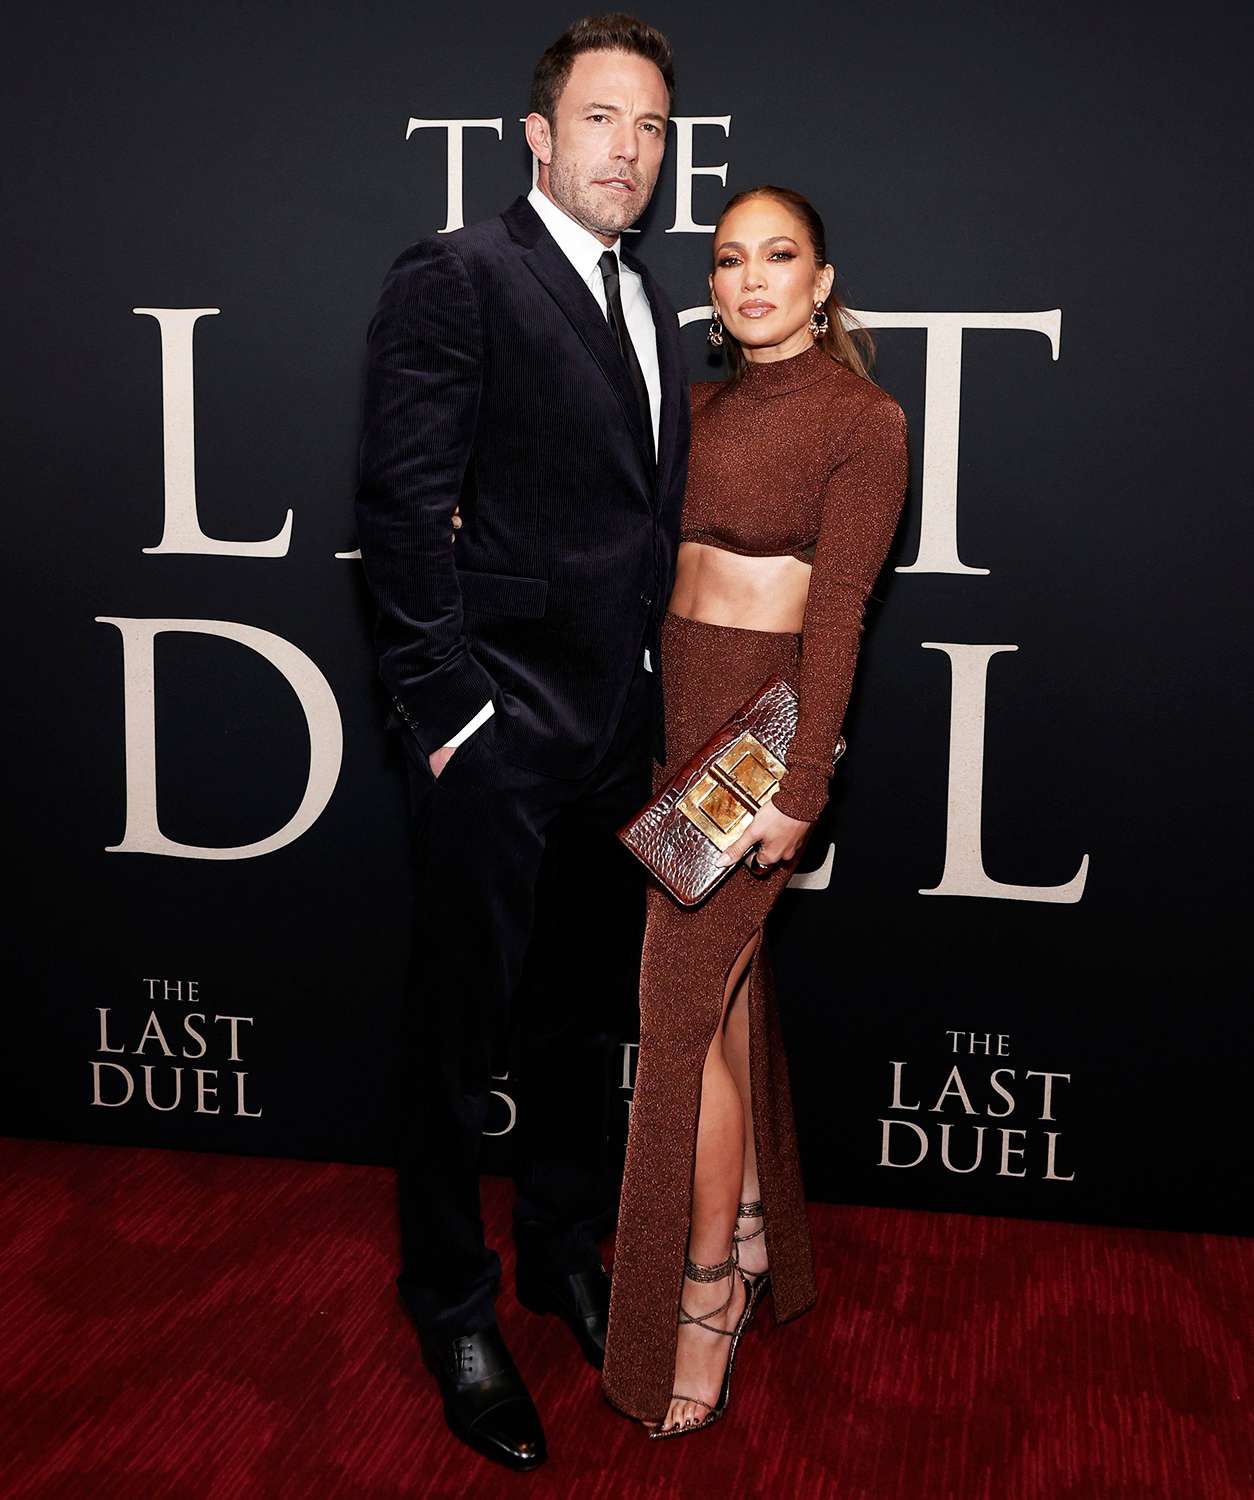 Ben Affleck and Jennifer Lopez attend "The Last Duel" New York Premiere at Rose Theater at Jazz at Lincoln Center's Frederick P. Rose Hall on October 09, 2021 in New York City.